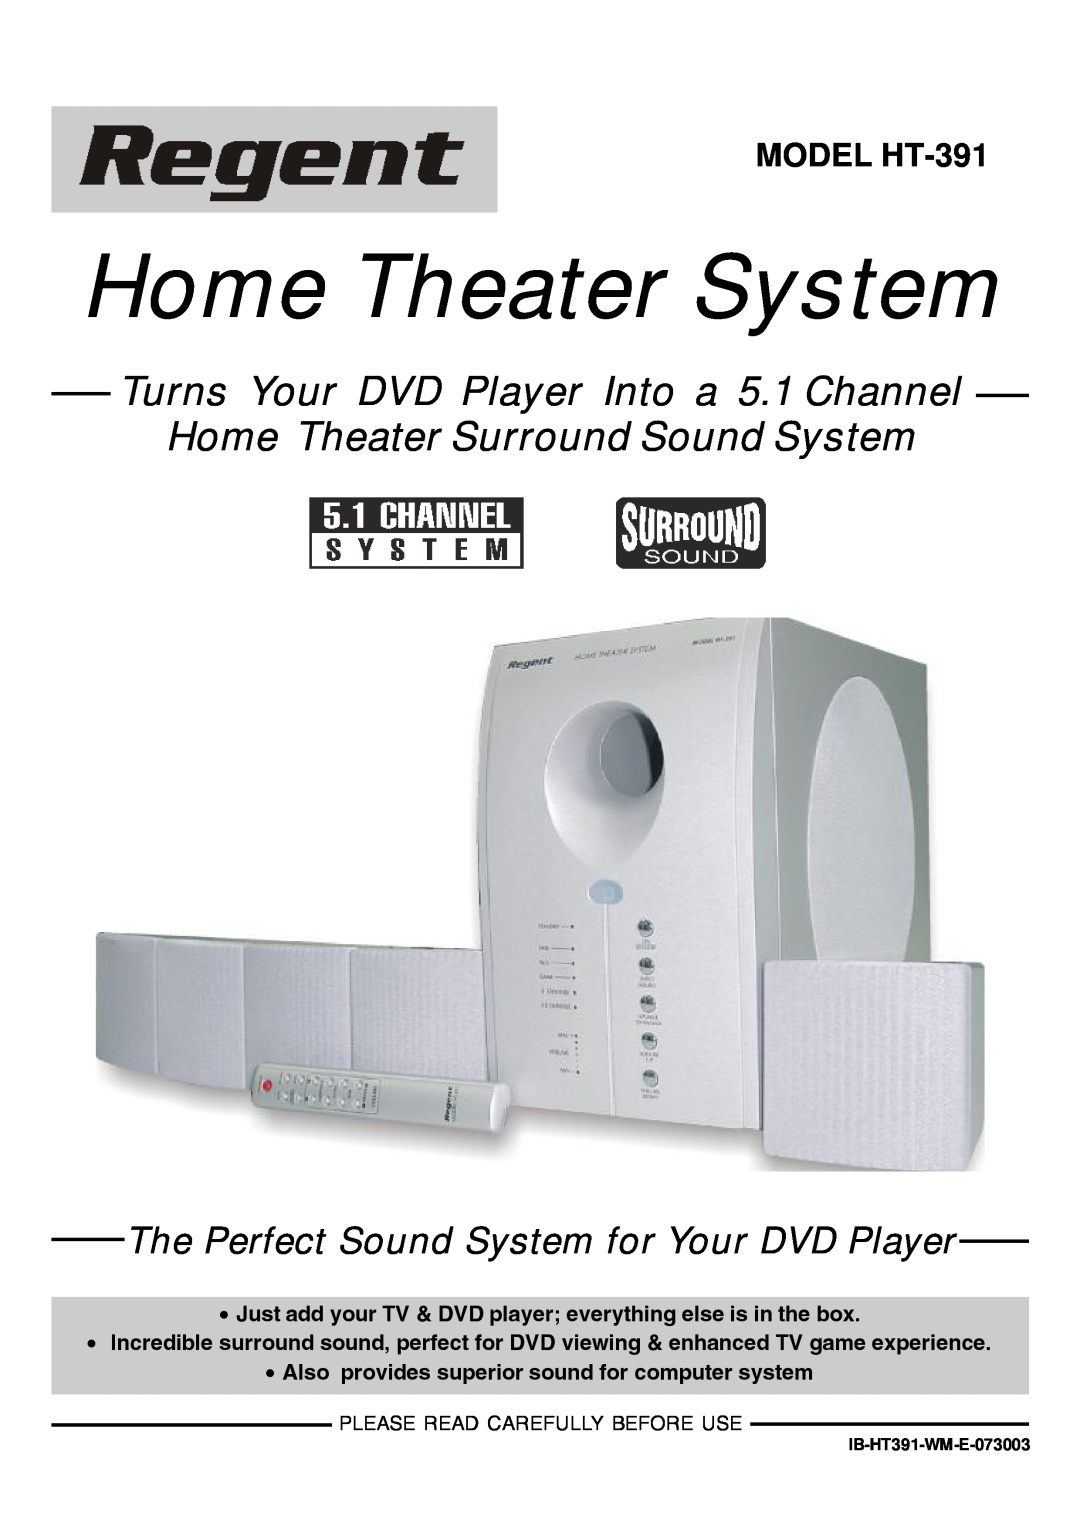 Lenoxx Electronics manual Home Theater System, Turns Your DVD Player Into a 5.1 Channel, MODEL HT-391 